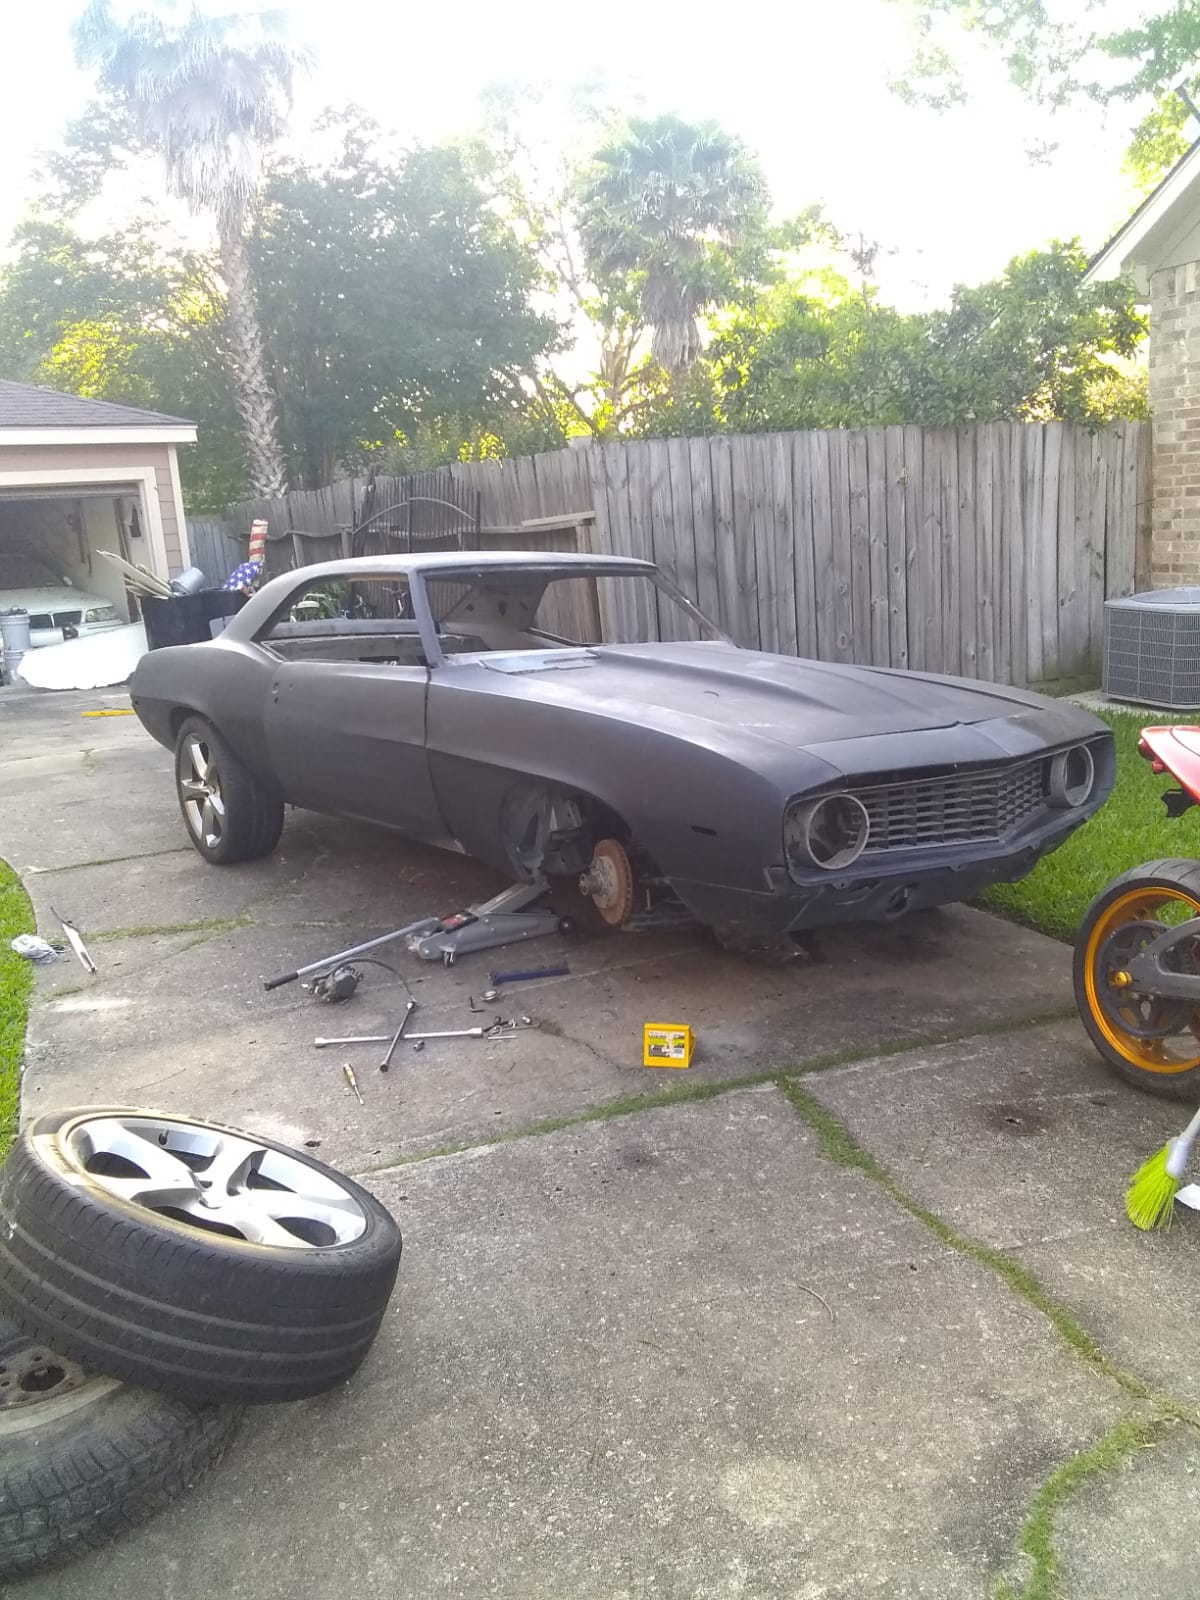 1969 Camaro SS project car for sale - Camaro Forums ...